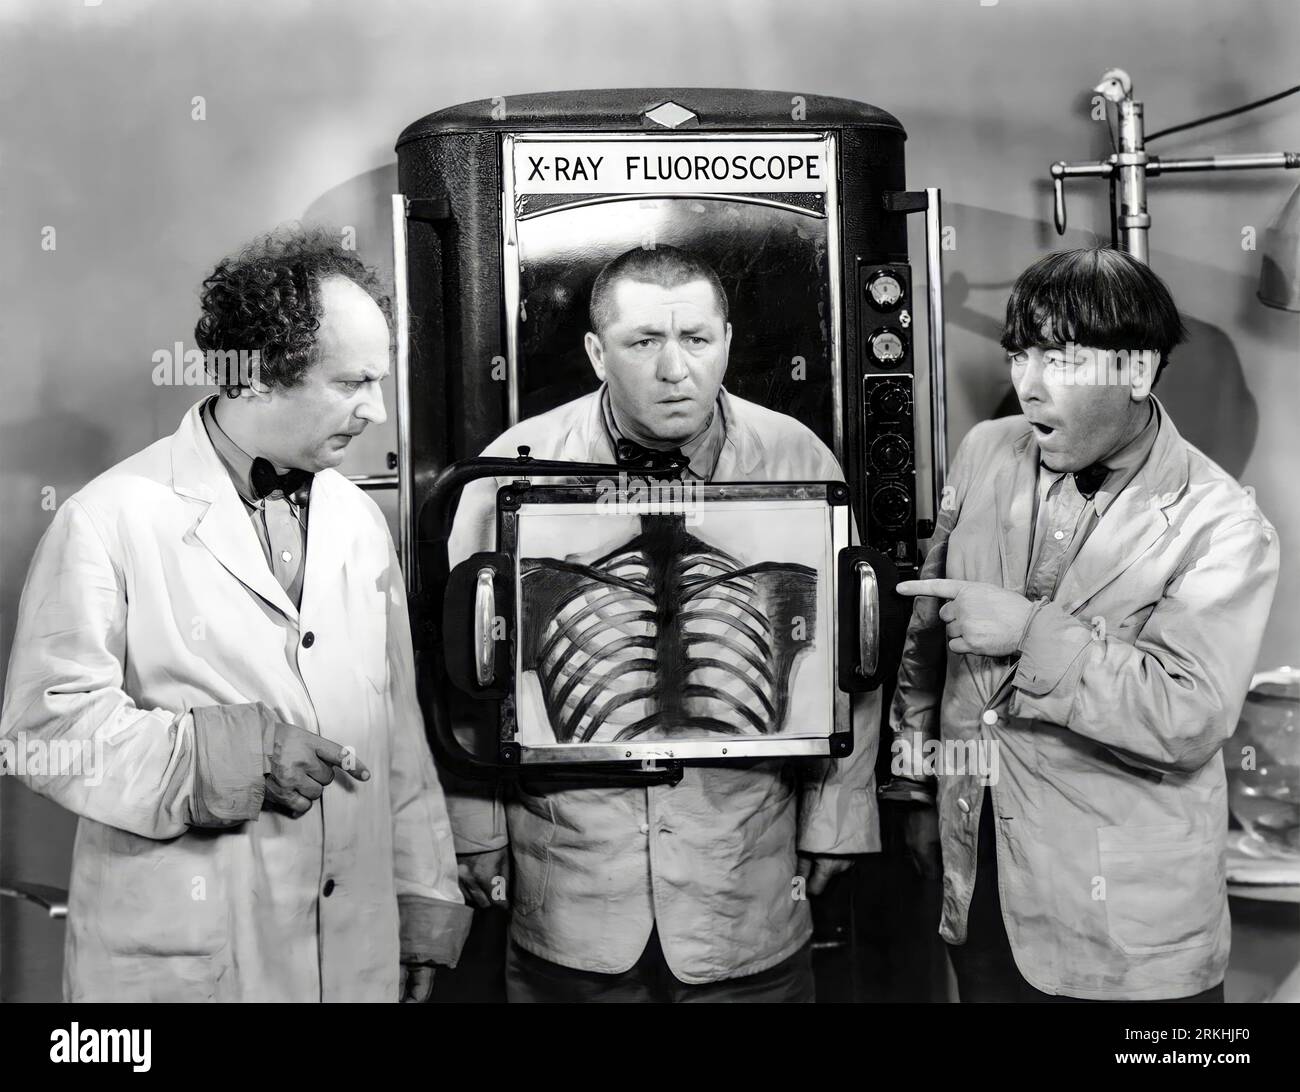 MOE HOWARD, LARRY FINE, CURLY HOWARD and THE THREE STOOGES in DIZZY DOCTORS (1937), directed by DEL LORD. Credit: COLUMBIA PICTURES / Album Stock Photo